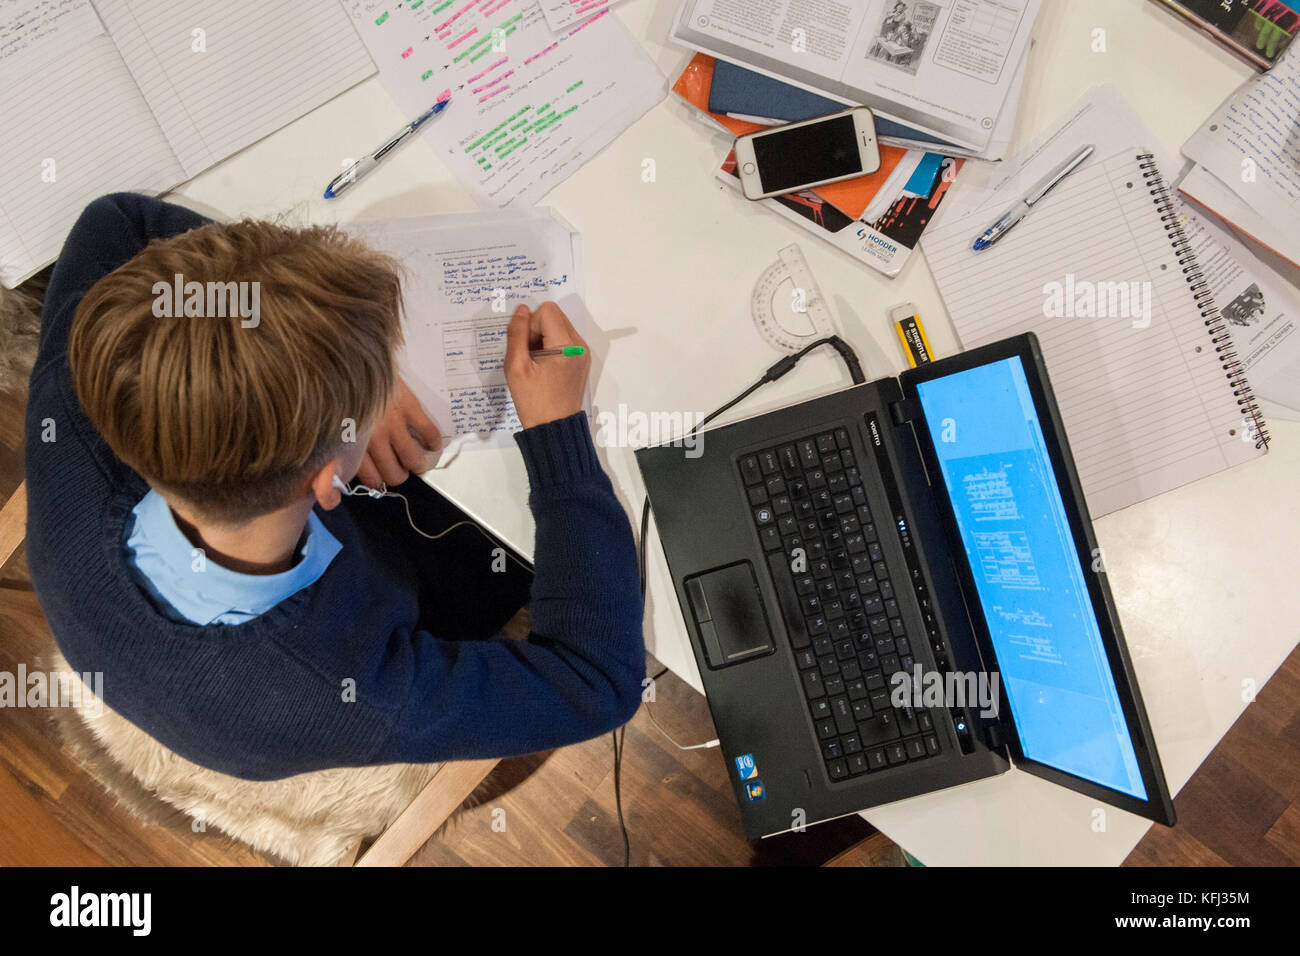 A young boy does his homework at the kitchen table in preparation for upcoming exams Stock Photo